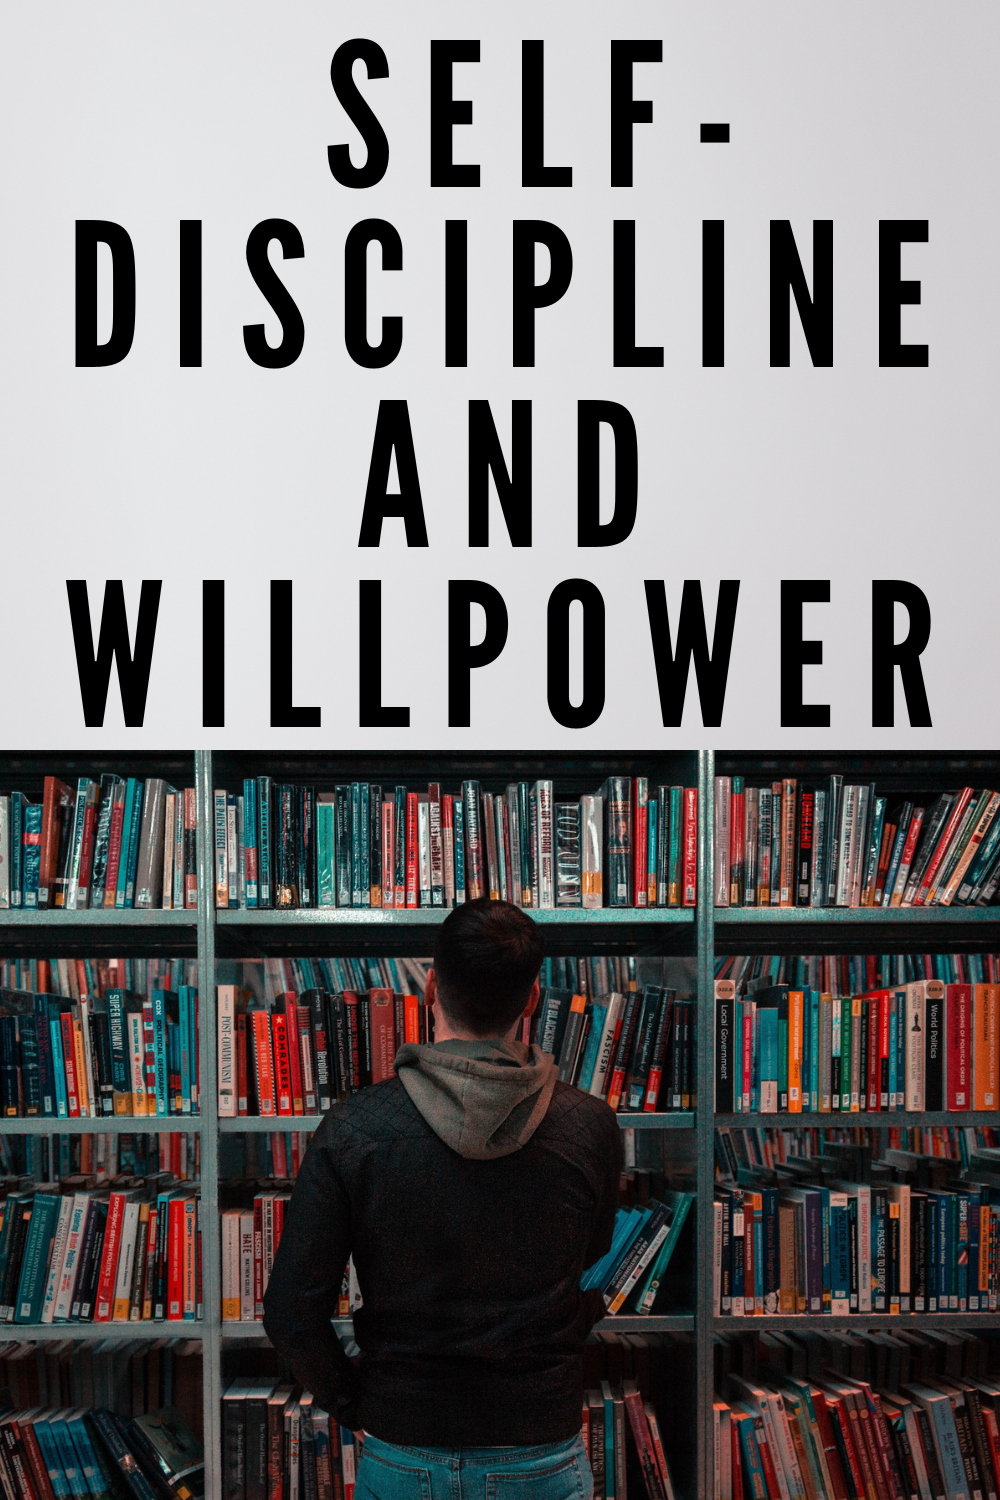 self-discipline and willpower